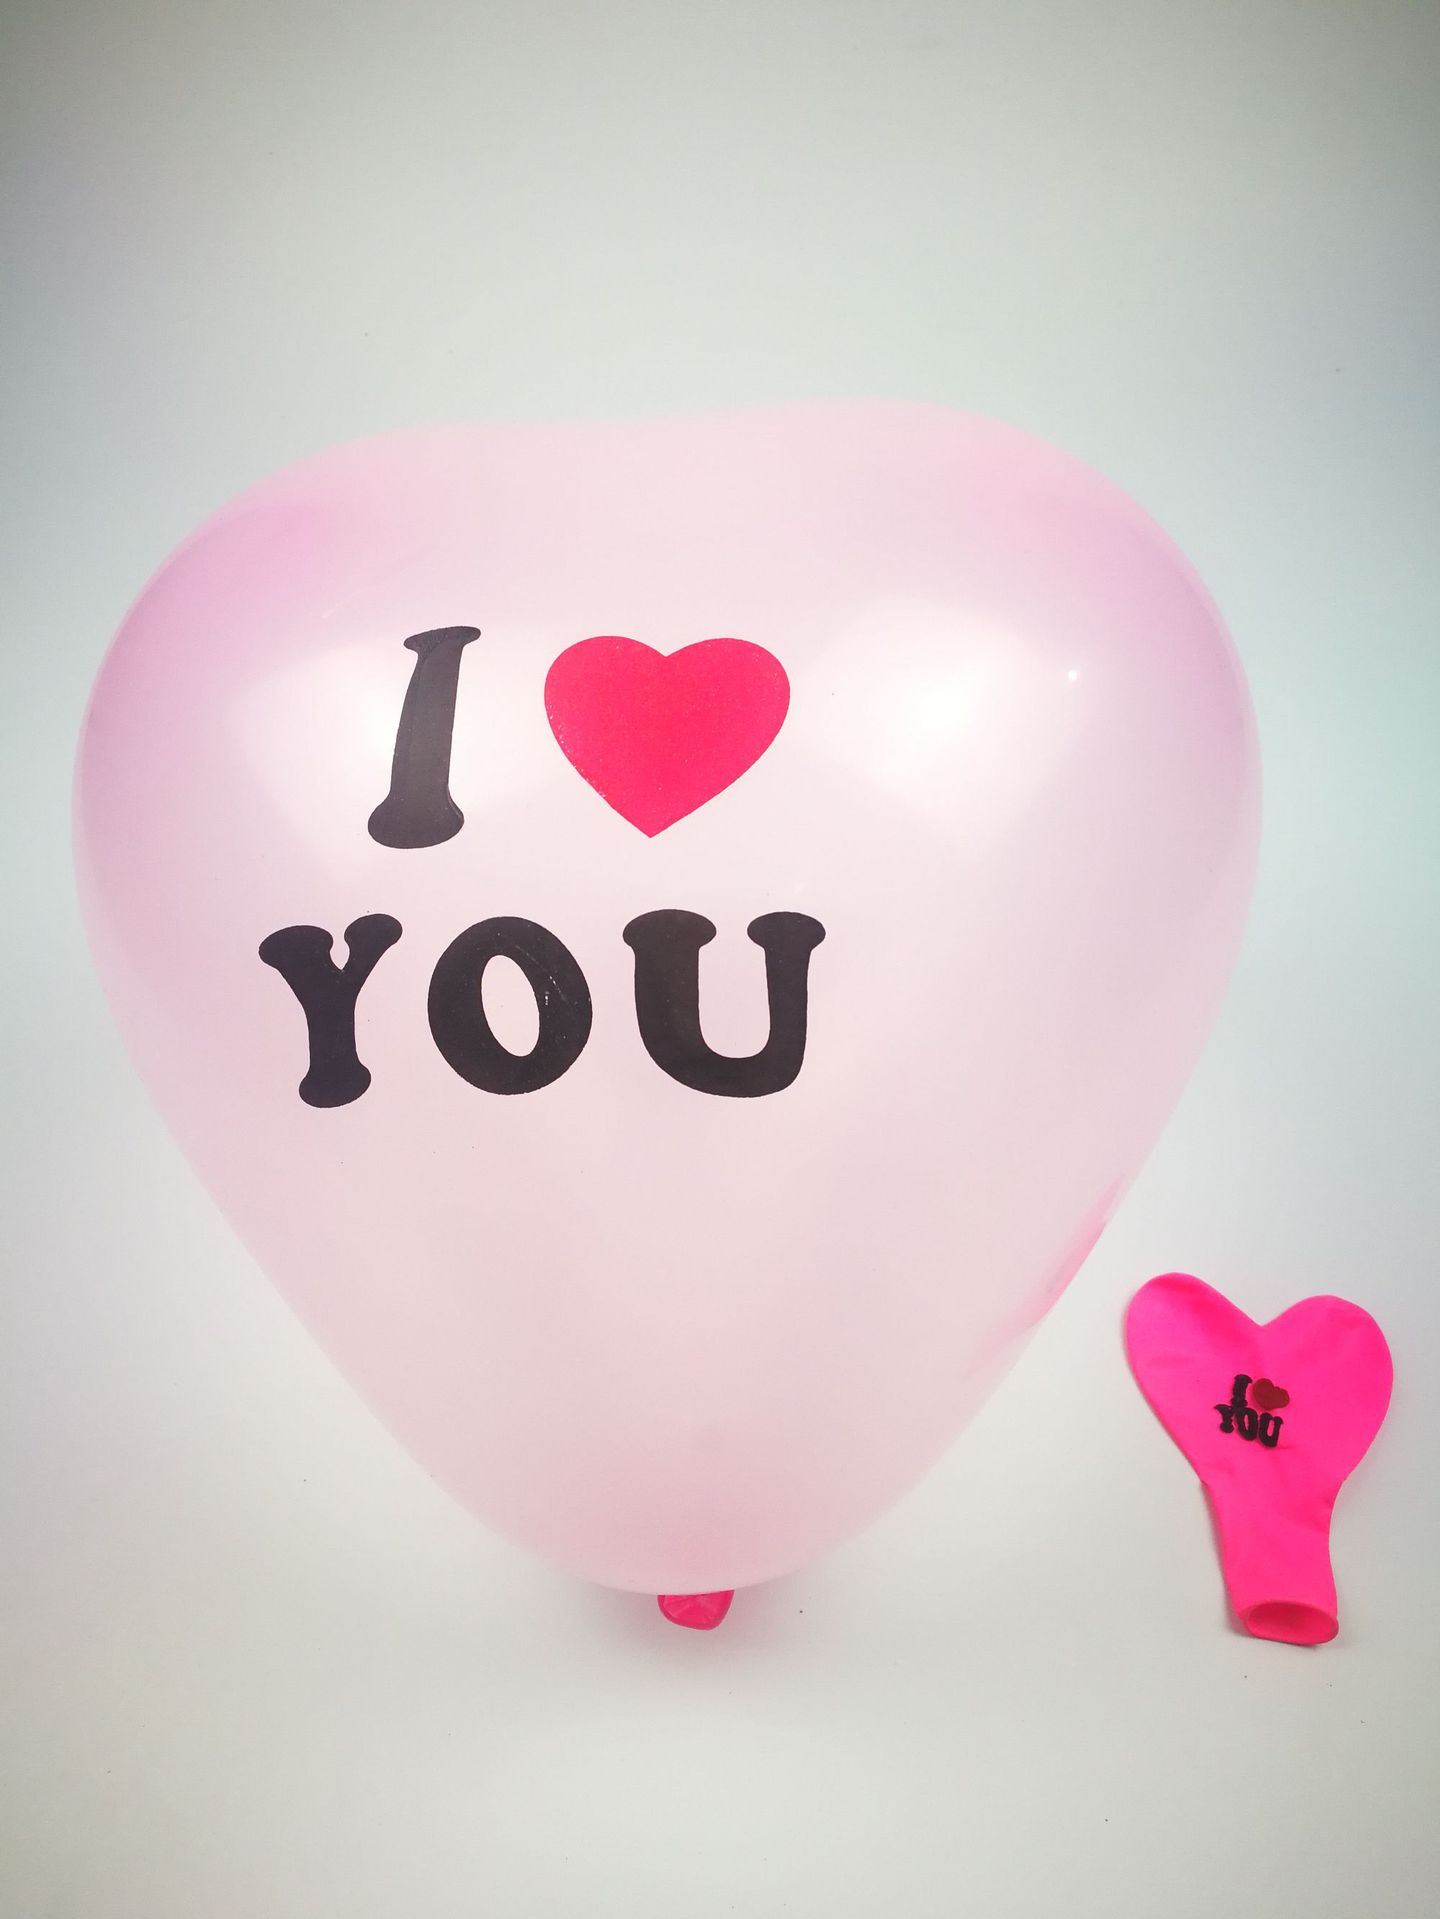 Factory Direct Sales 3G I Heart U Printed Balloon Wedding Room Party Decoration Balloon Proposal Heart-Shaped Balloon 12-Inch 100